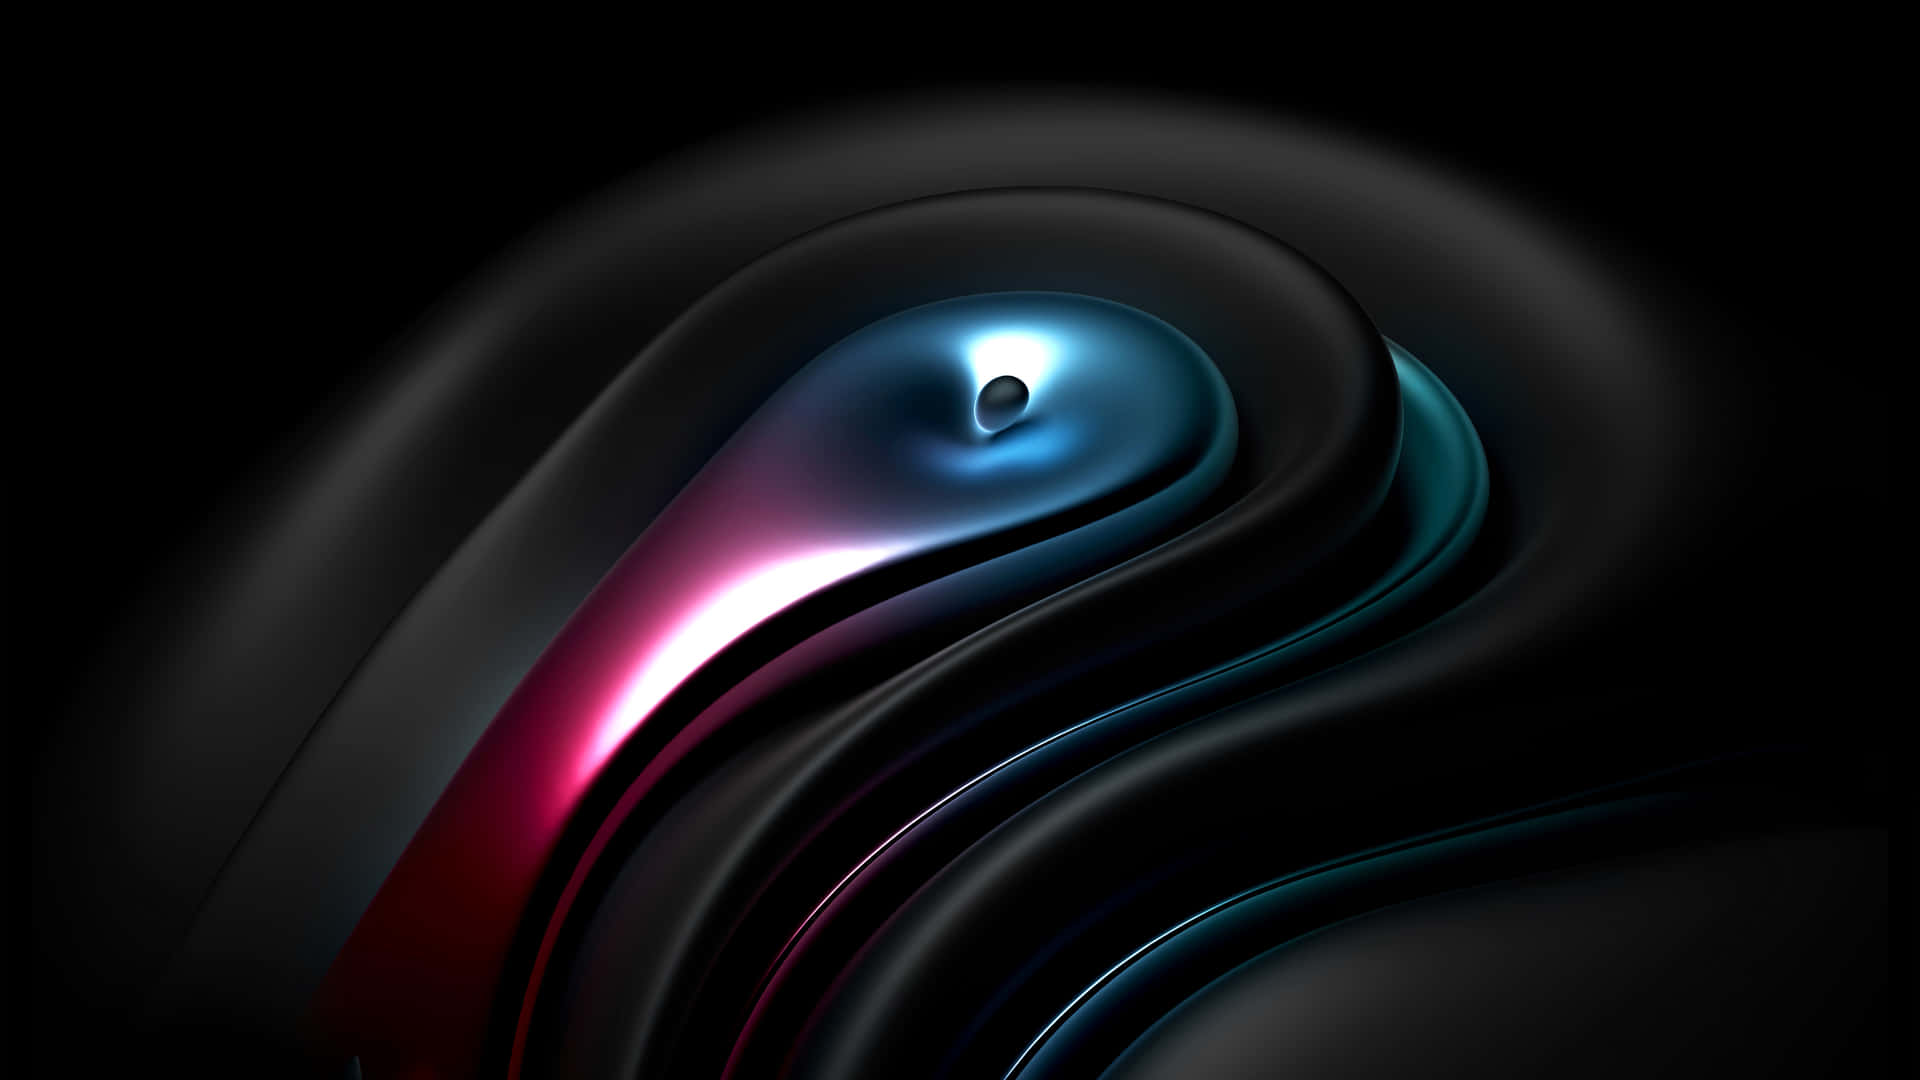 A Black Background With A Colorful Swirl